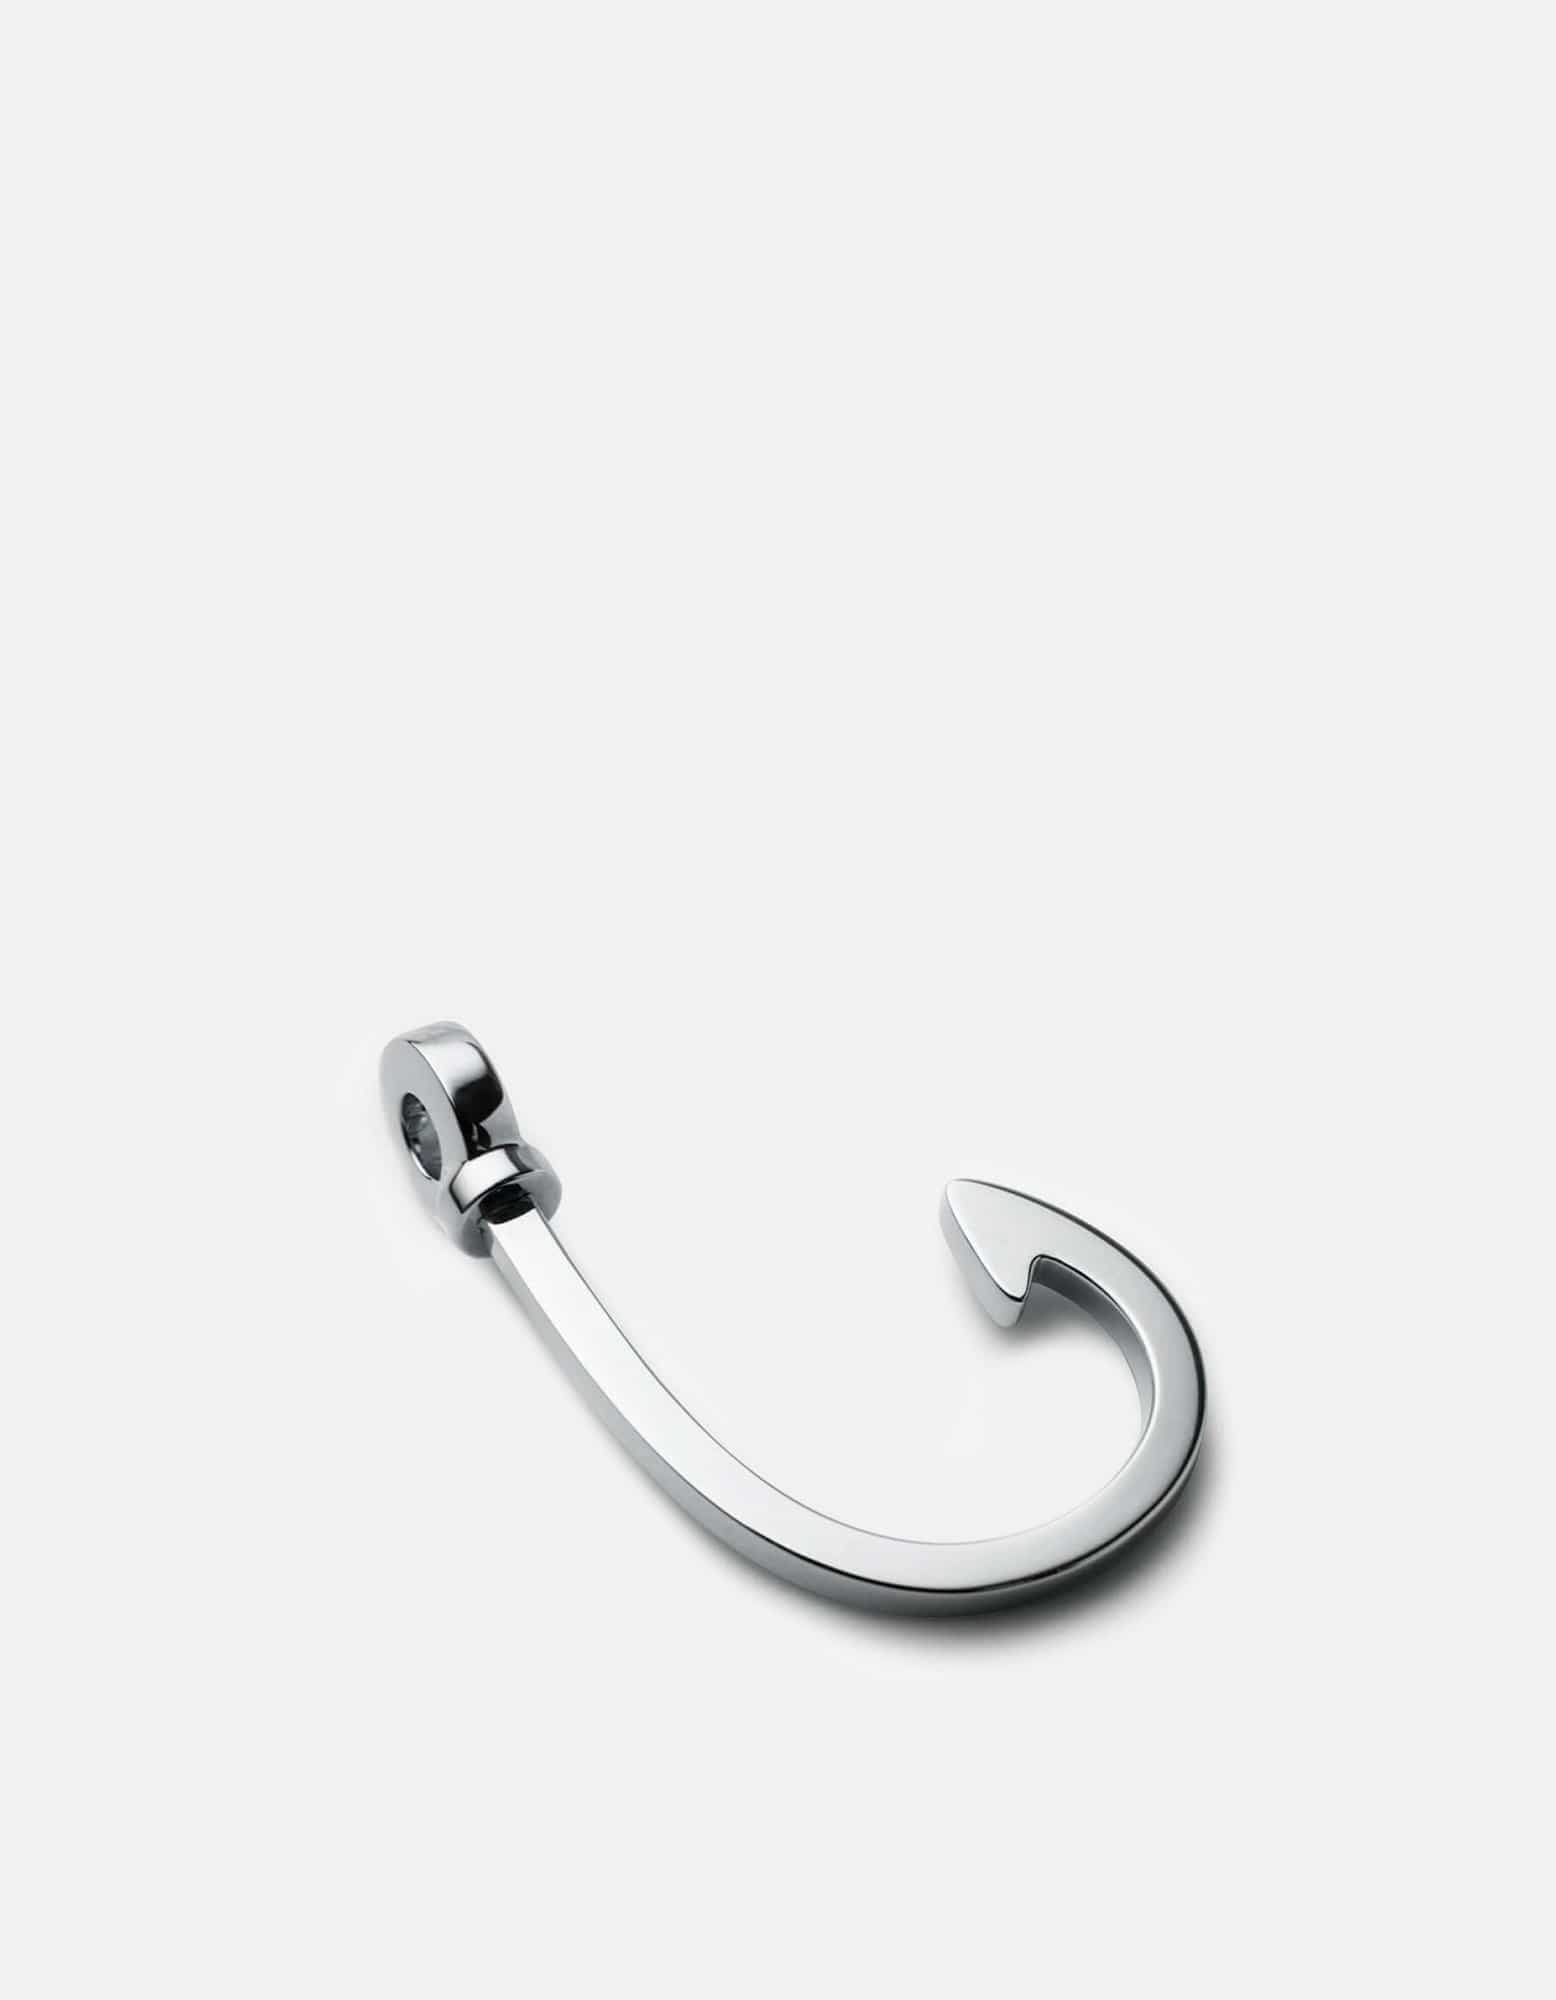 Hooked Keychain, Sterling Silver